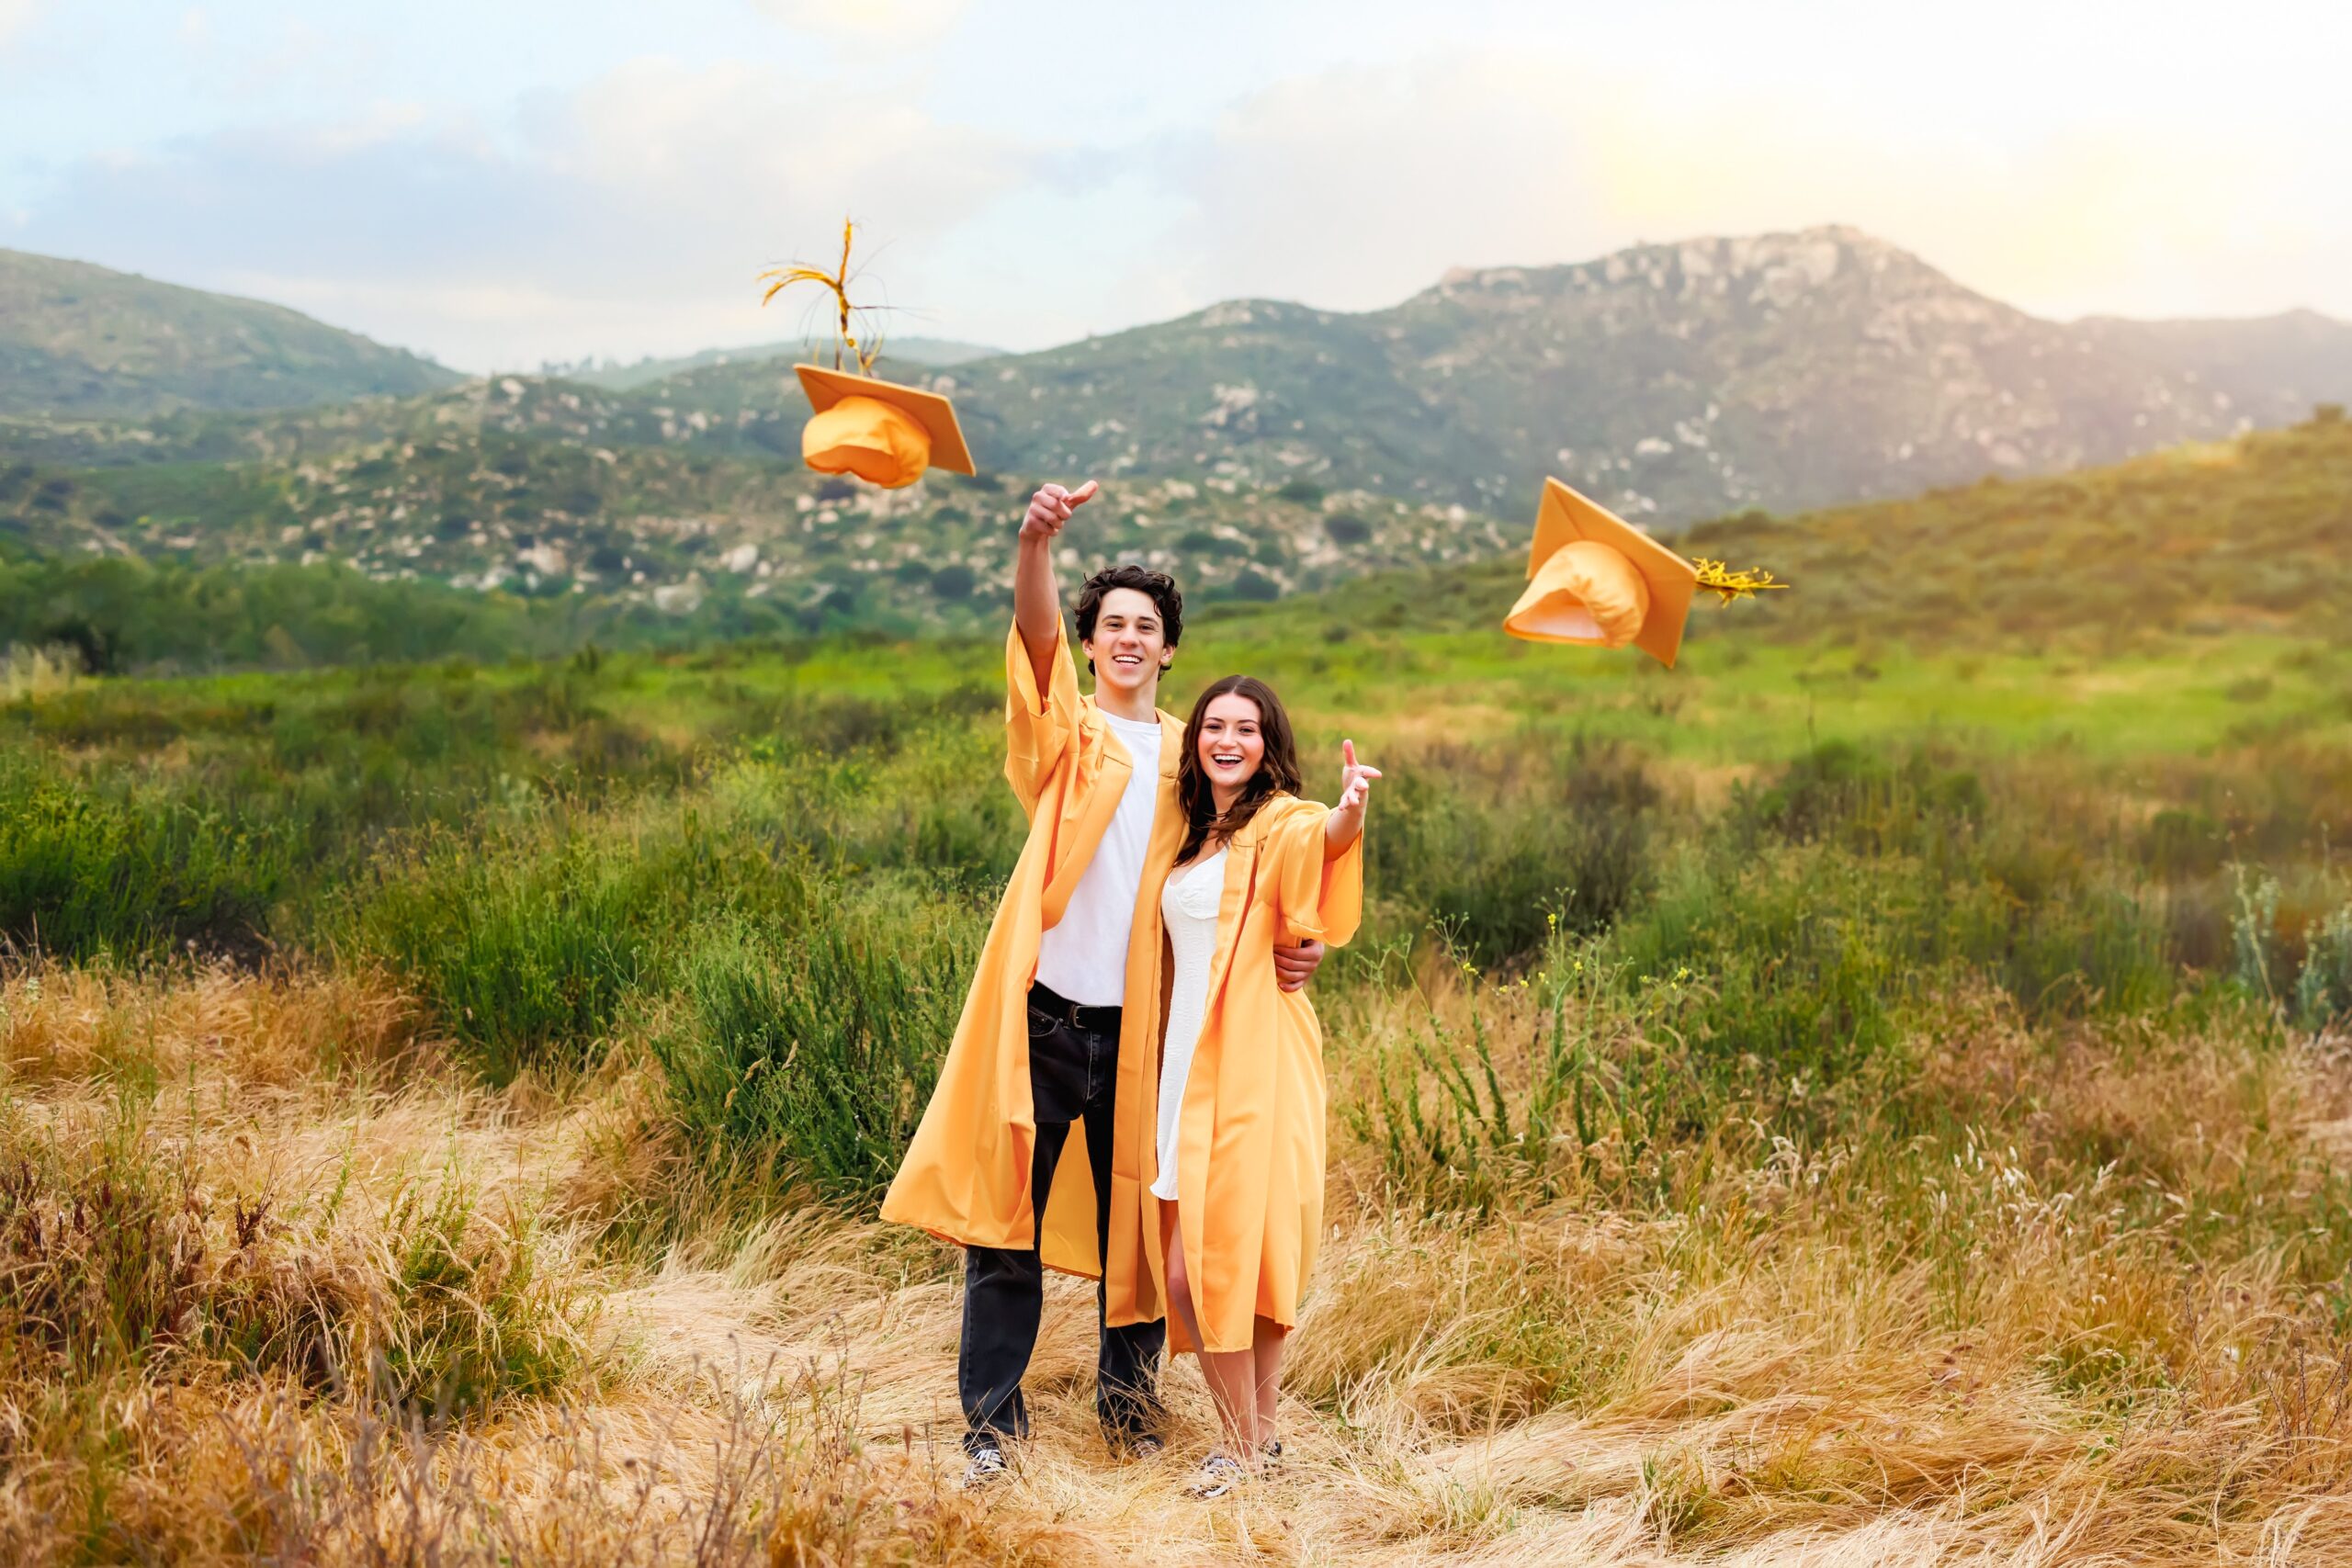 Two Temecula Valley High School seniors throwing their caps